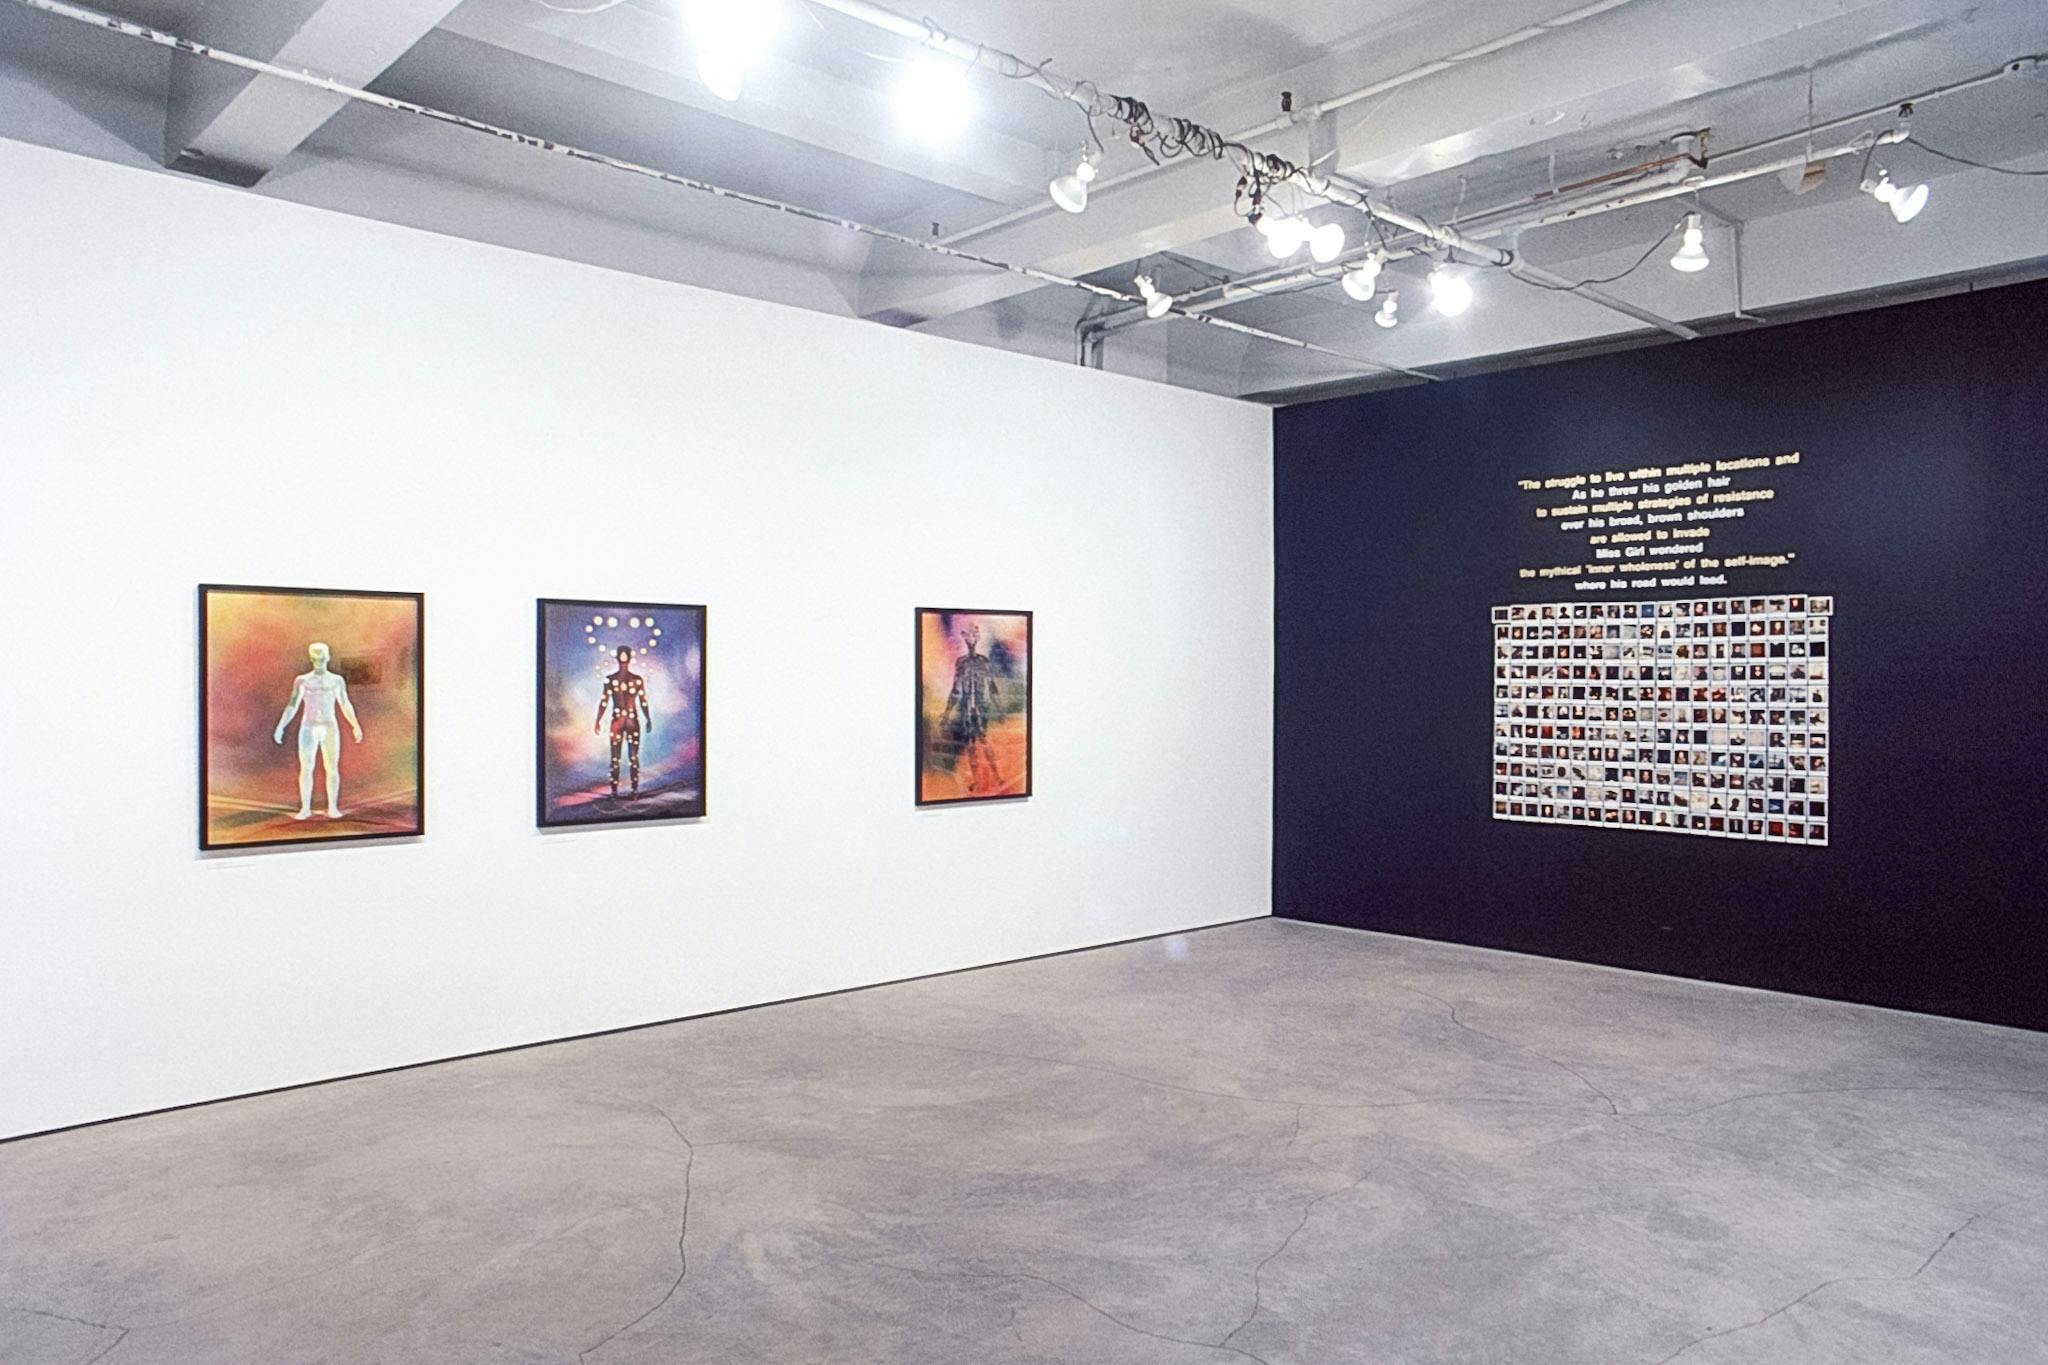 The corner of a gallery with a white and a black wall. On the white wall are 3 colourful, hazy images of nude muscular bodies. On the black wall there is white and yellow text and dozens of Polaroids.